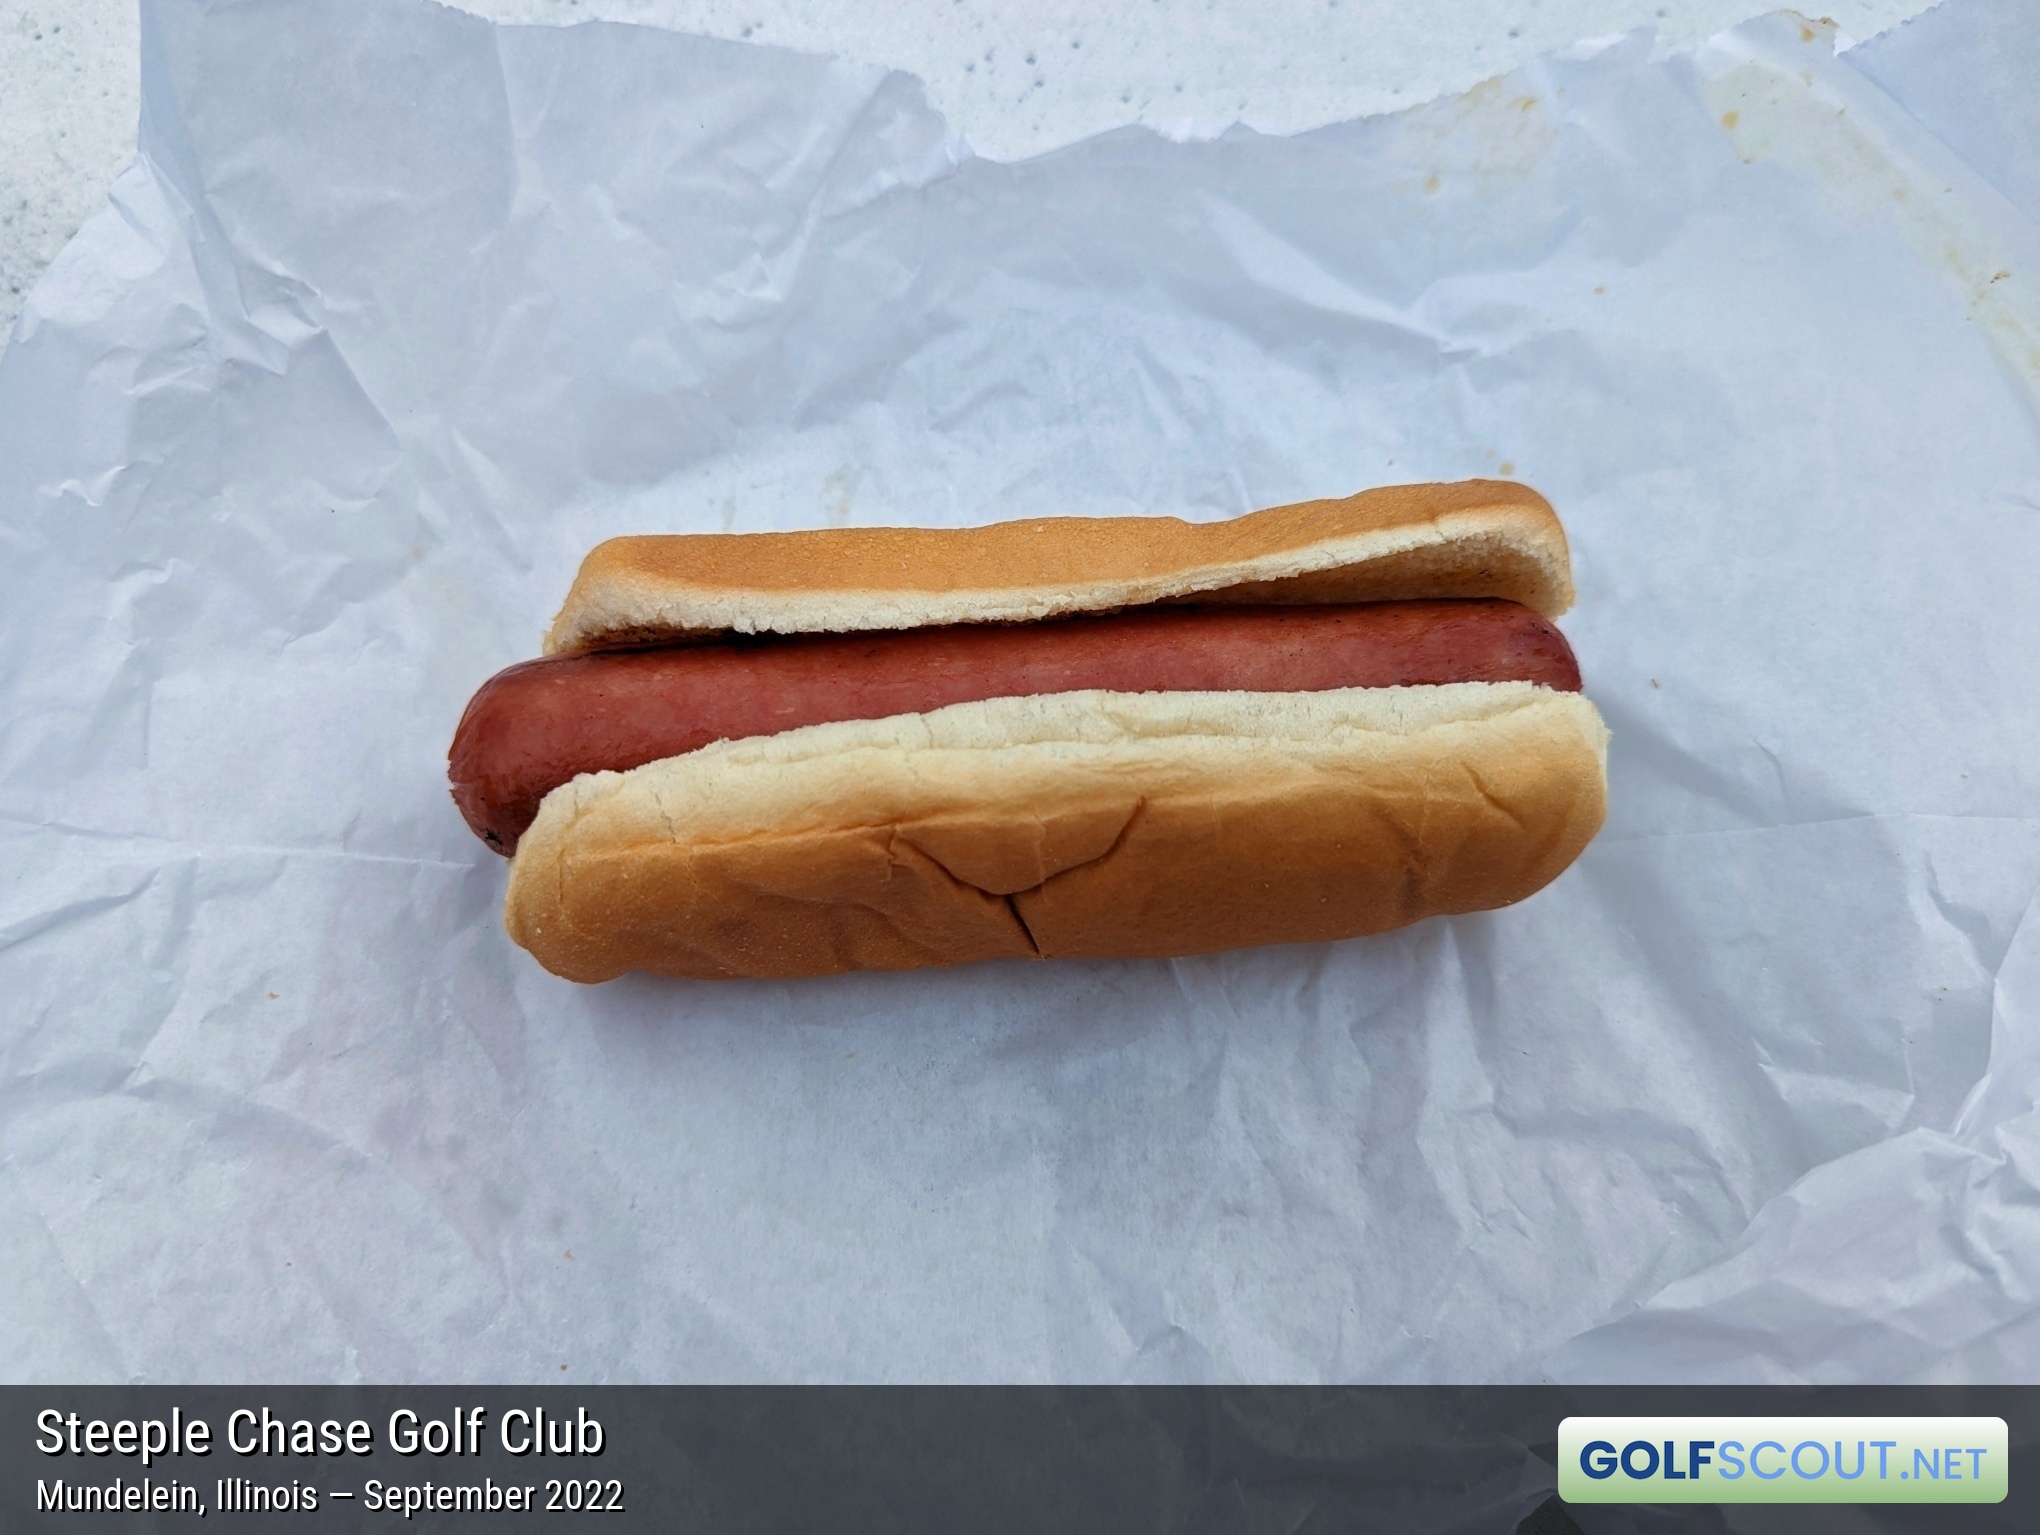 Photo of the food and dining at Steeple Chase Golf Club in Mundelein, Illinois. Photo of the hot dog at Steeple Chase Golf Club in Mundelein, Illinois.